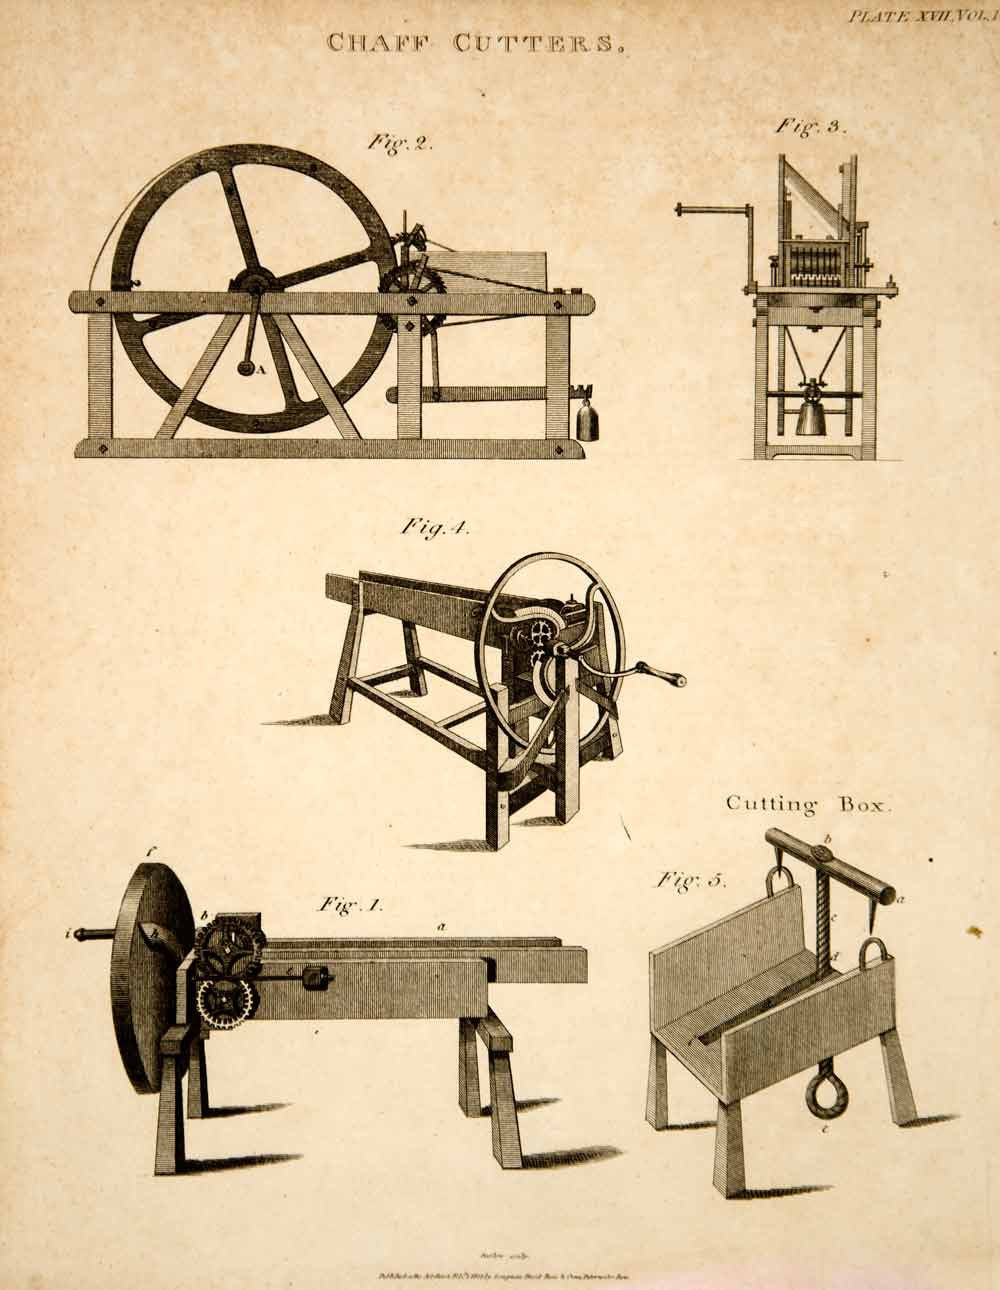 1807 Copper Engraving Manual Chaff Cutter Farm Machinery Tool Agriculture TCF1 - Period Paper
